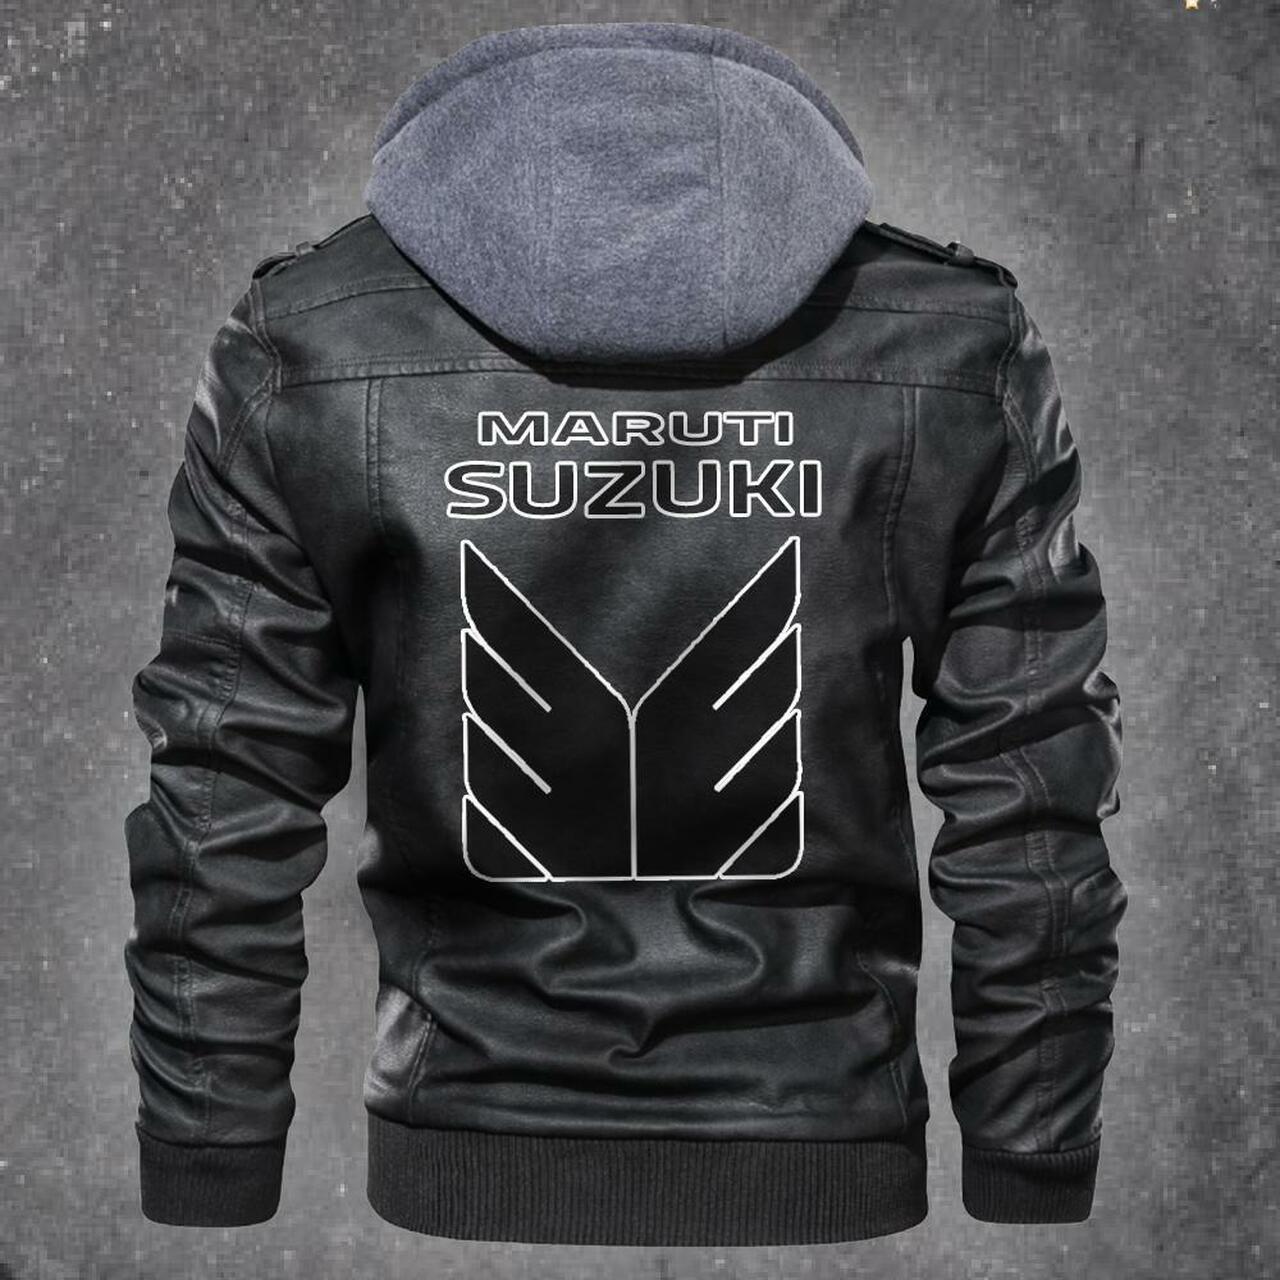 Check out our collection of the latest and greatest leather jacket 131